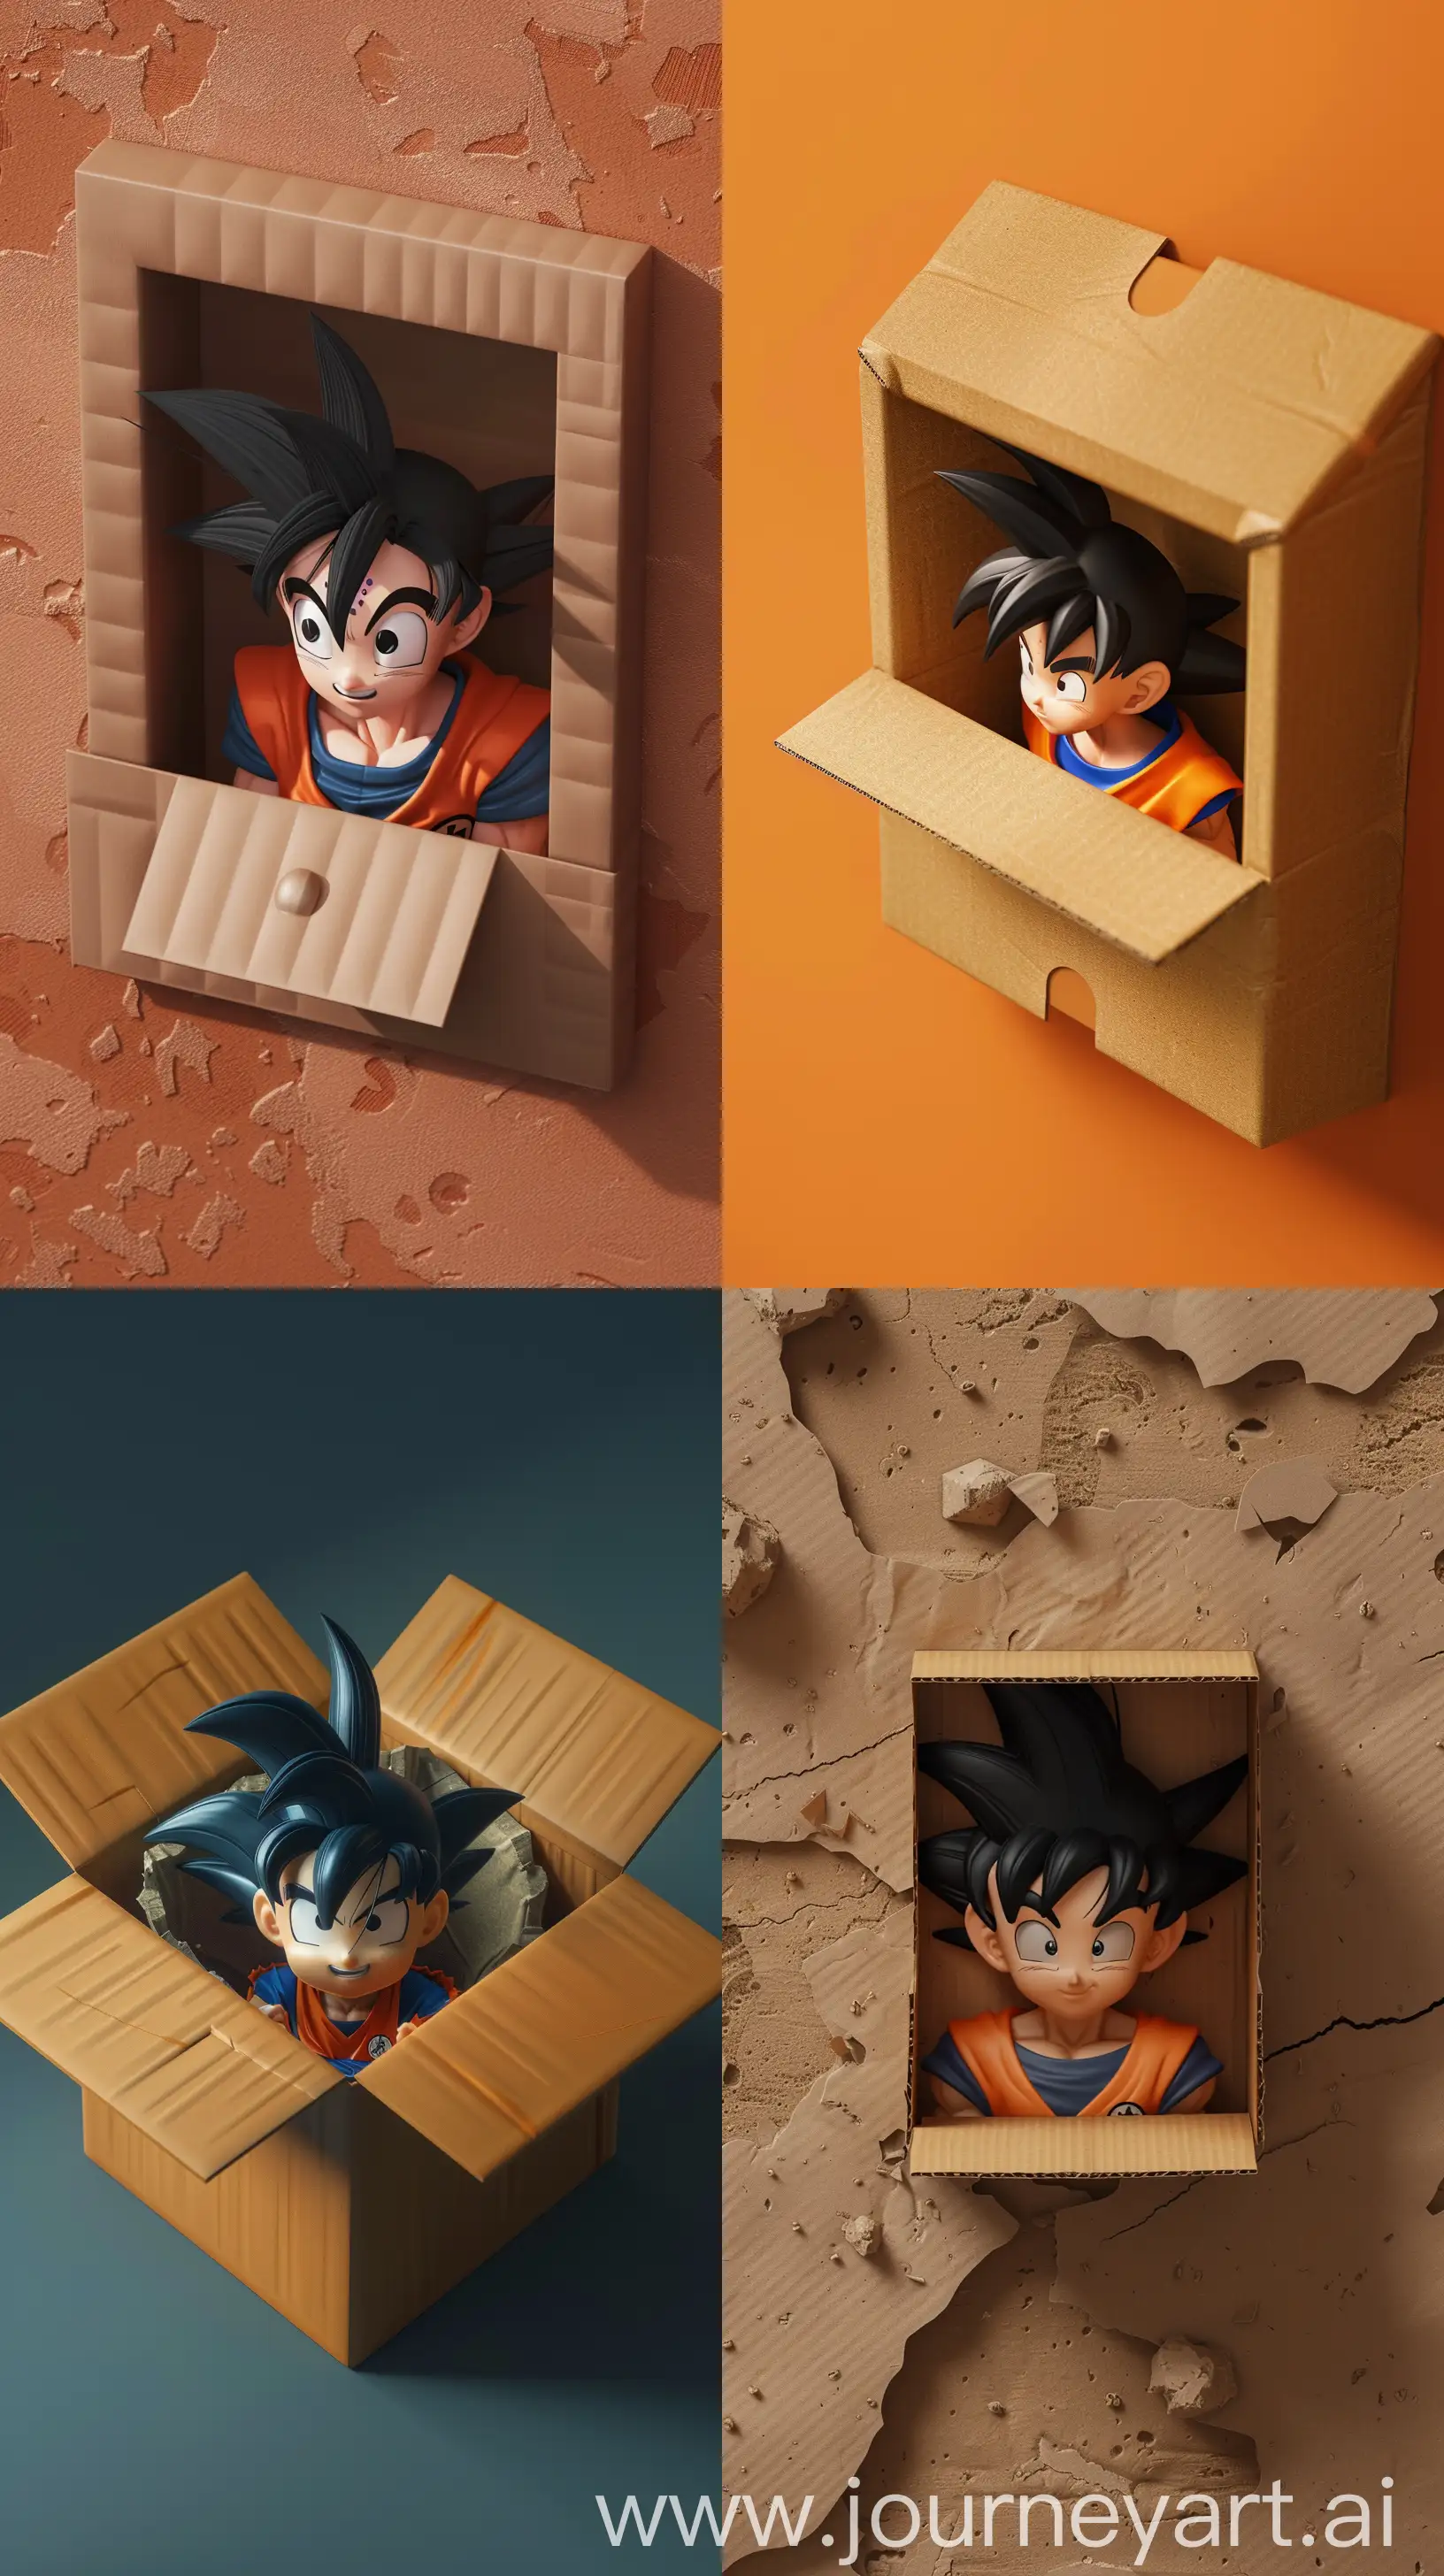 A isometric 3D rendered image of a cardboard box with Son Goku from Dragon Ball inside, framed by the edges of the box so it appears the character is peering out of the box like a window onto a desktop wallpaper or phone background. Include detailed textures on the cardboard and photorealistic rendering of the character. Composition emphasizes a sense of depth and realism within the dimensional borders of the box frame. --ar 9:16